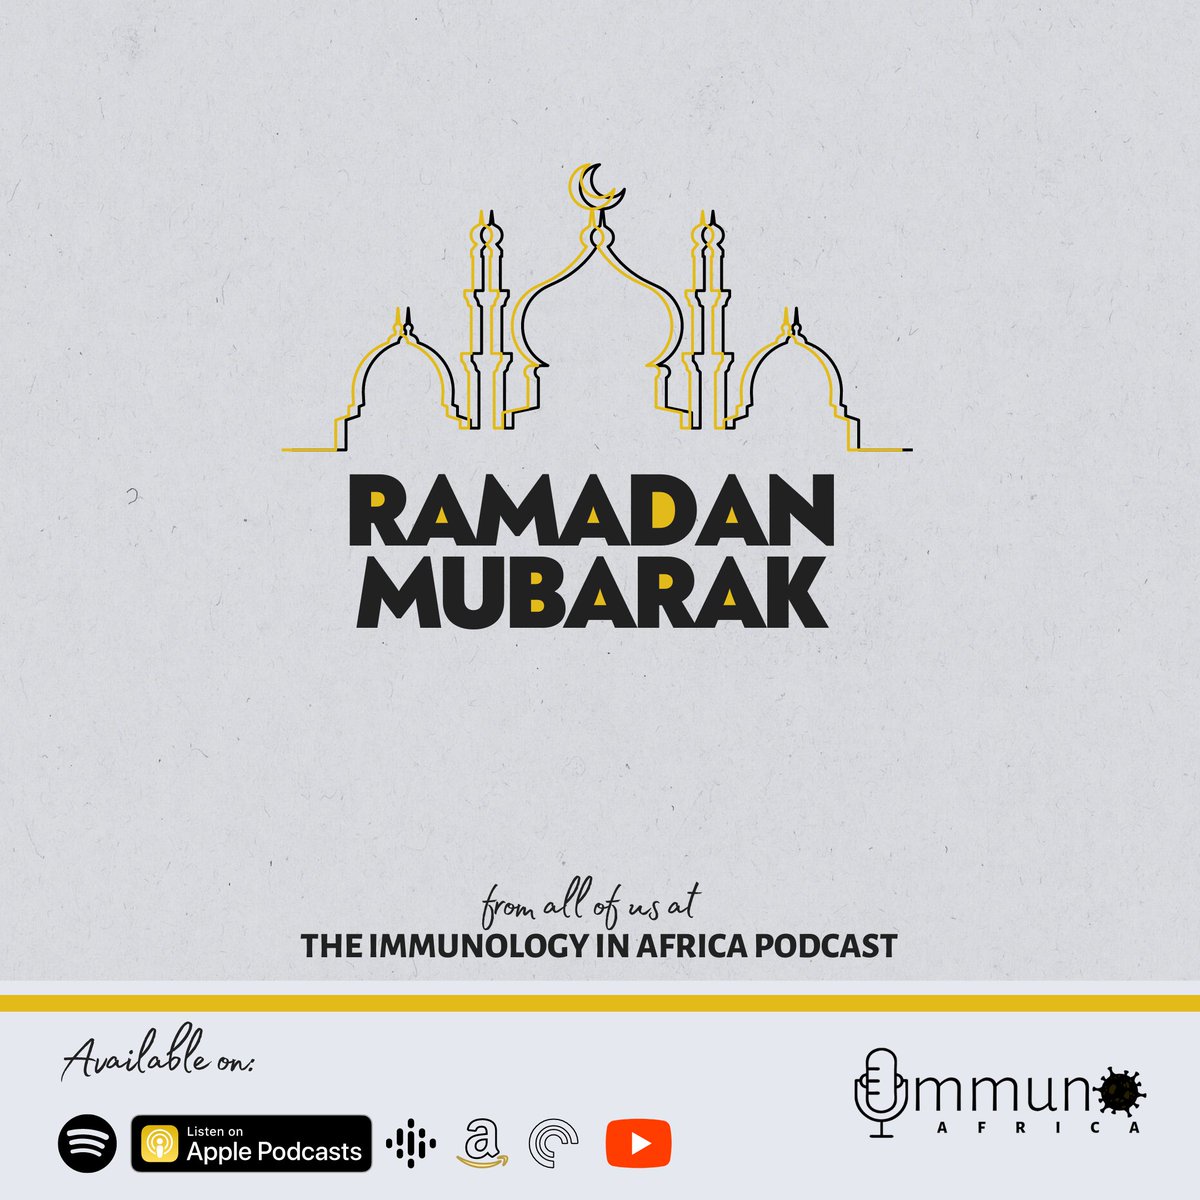 ...from all of us at @immunoafrica_

Happy Celebrations🌙

#RAMADAN